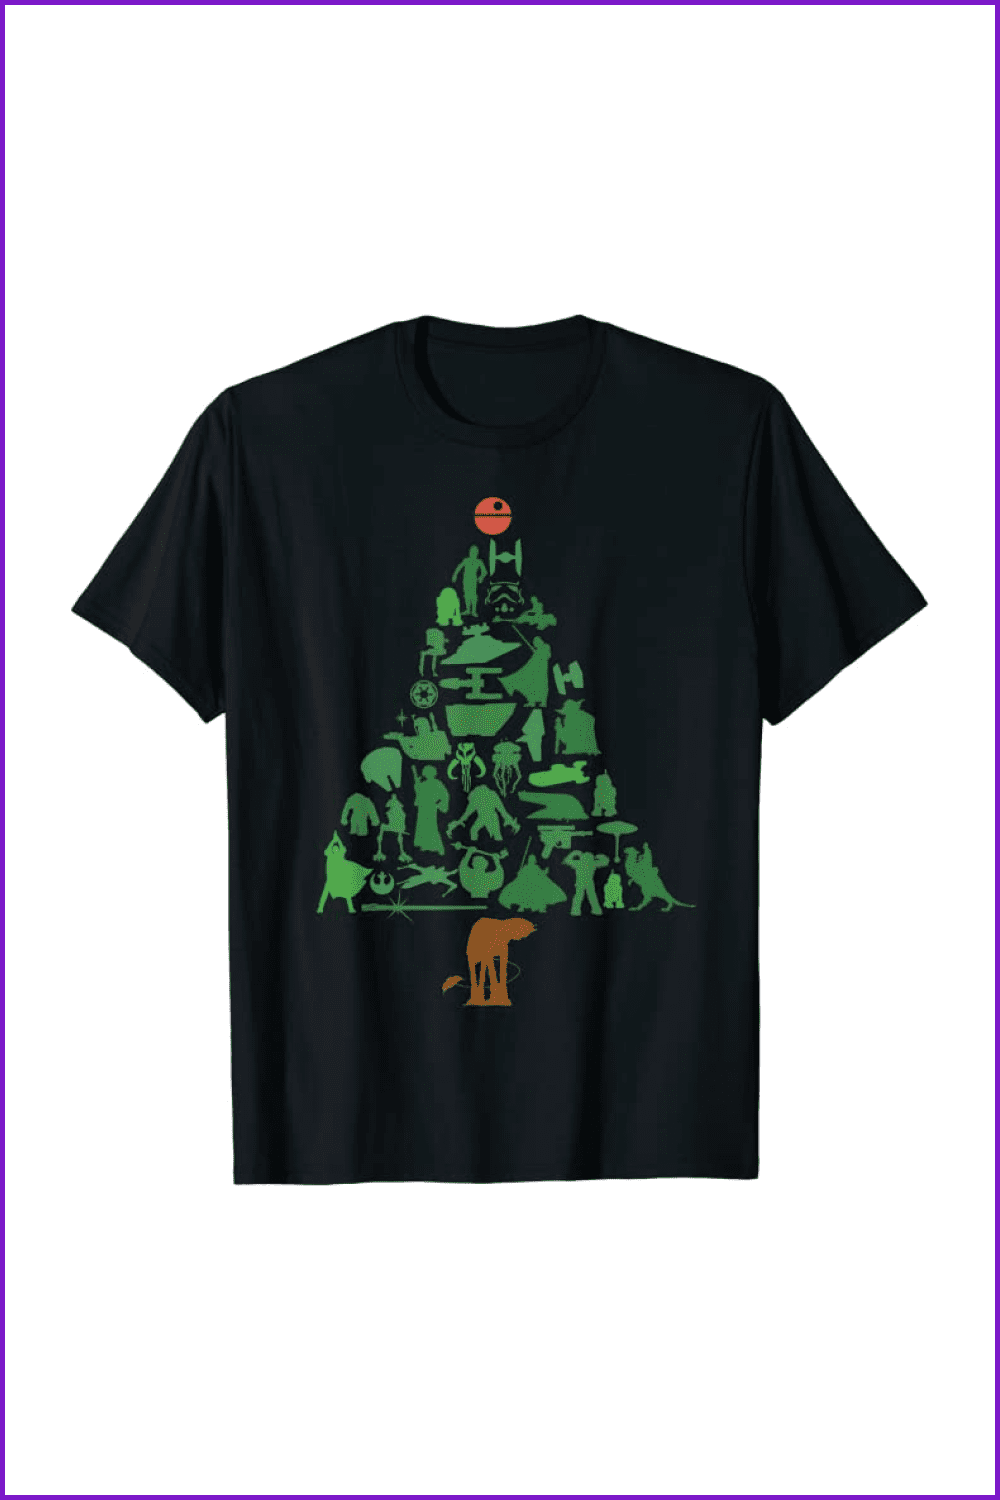 t-shirt with a Christmas tree and characters from the movie Star Wars.